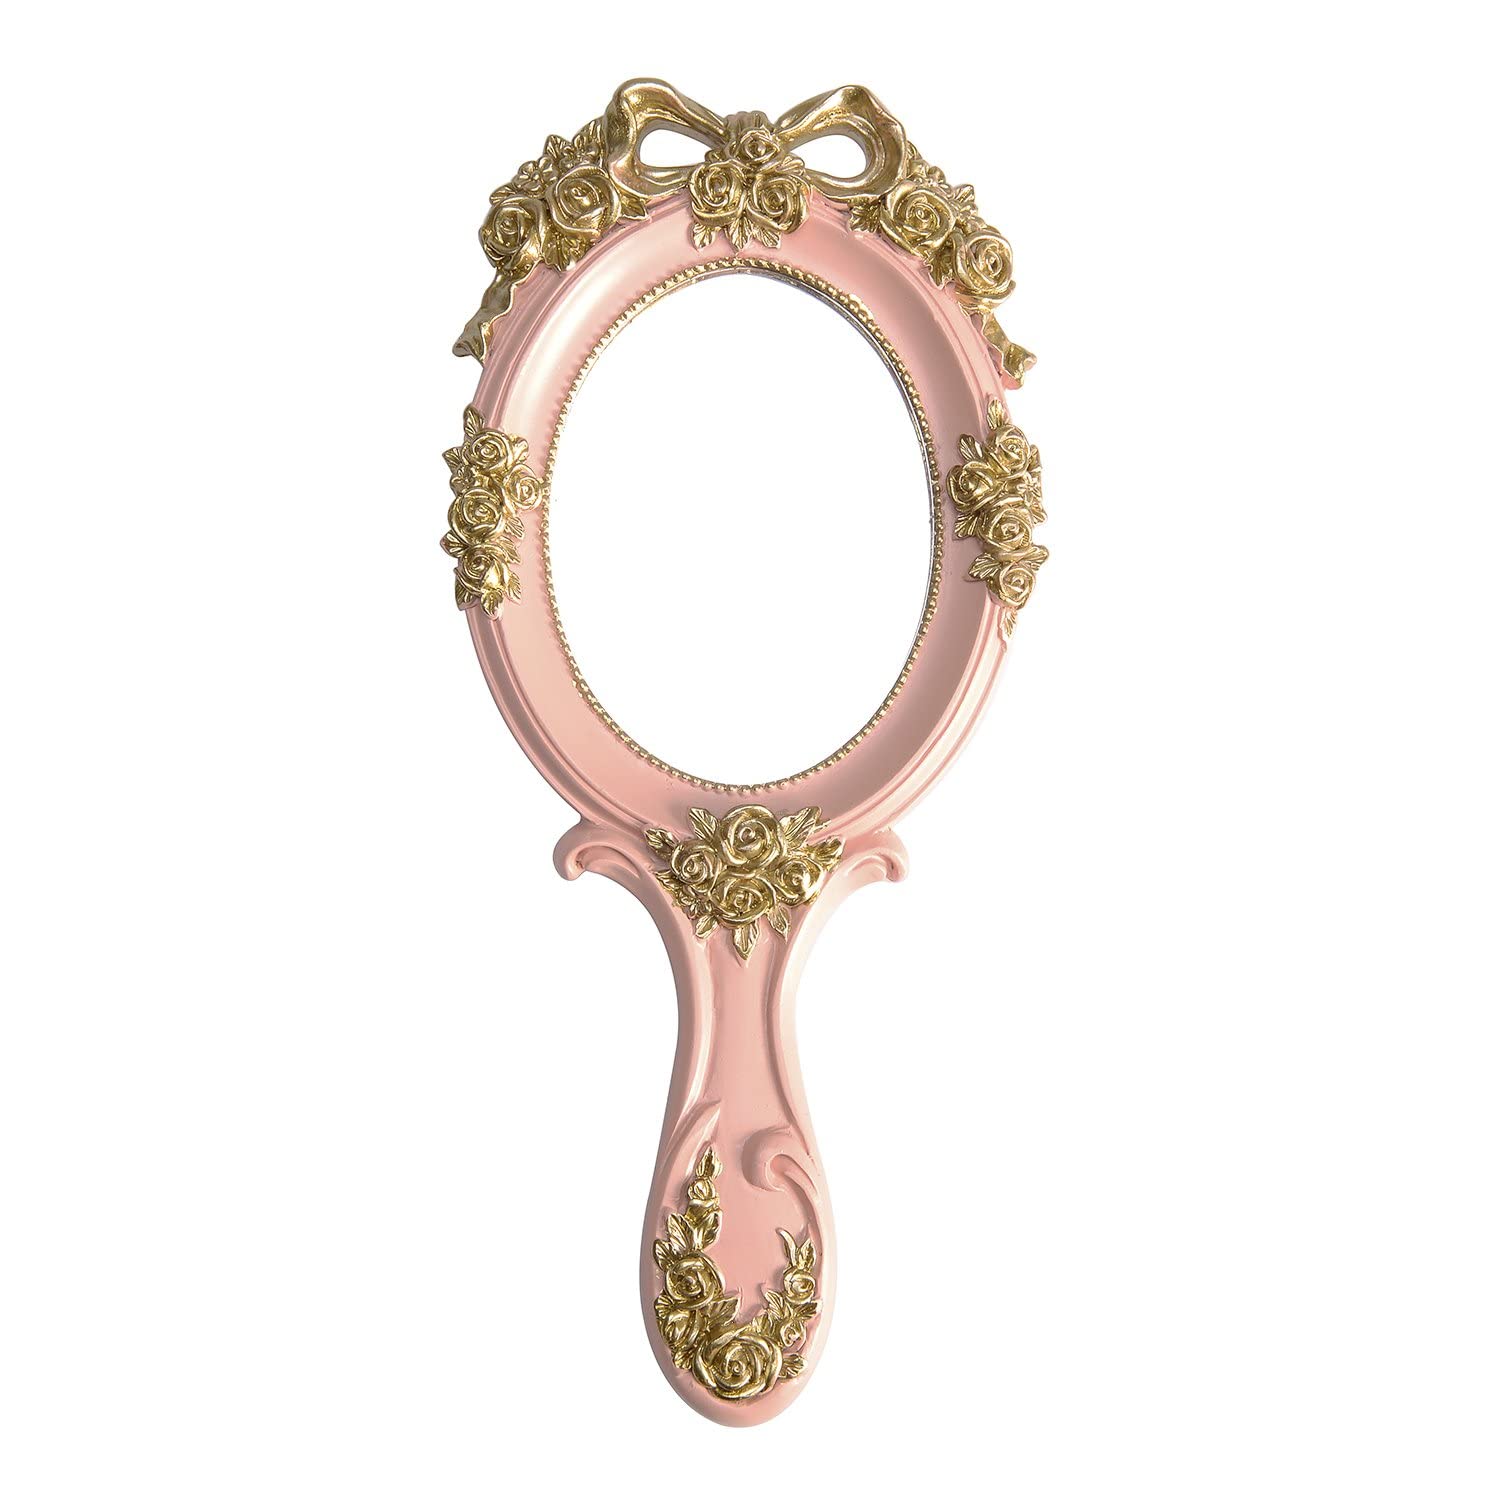 Taywes Vintage Hand Mirror with Handle - Cute Princess Pink Rose Cosmetic  Handheld Mirror Decorative for Girls Kids Women - Resin Material Round Oval  Handheld Mirror